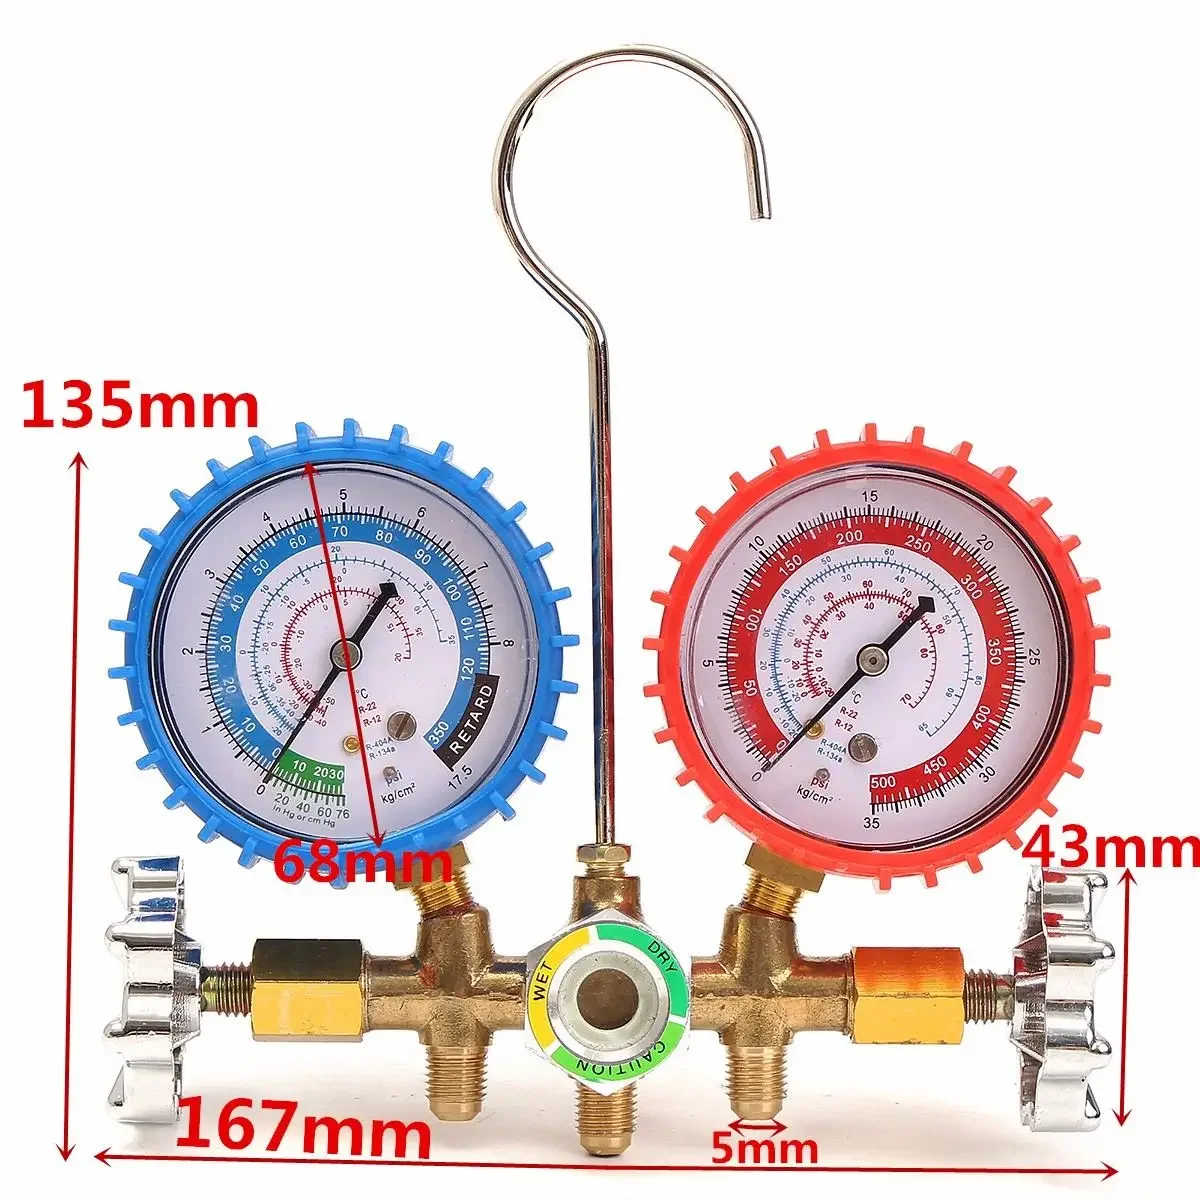 

Portable Manifold Gauge Set Lightweight Test Diagnostic Repair Tools Kit for R134A R12 R22 R502 Refrigerant Air Conditioning